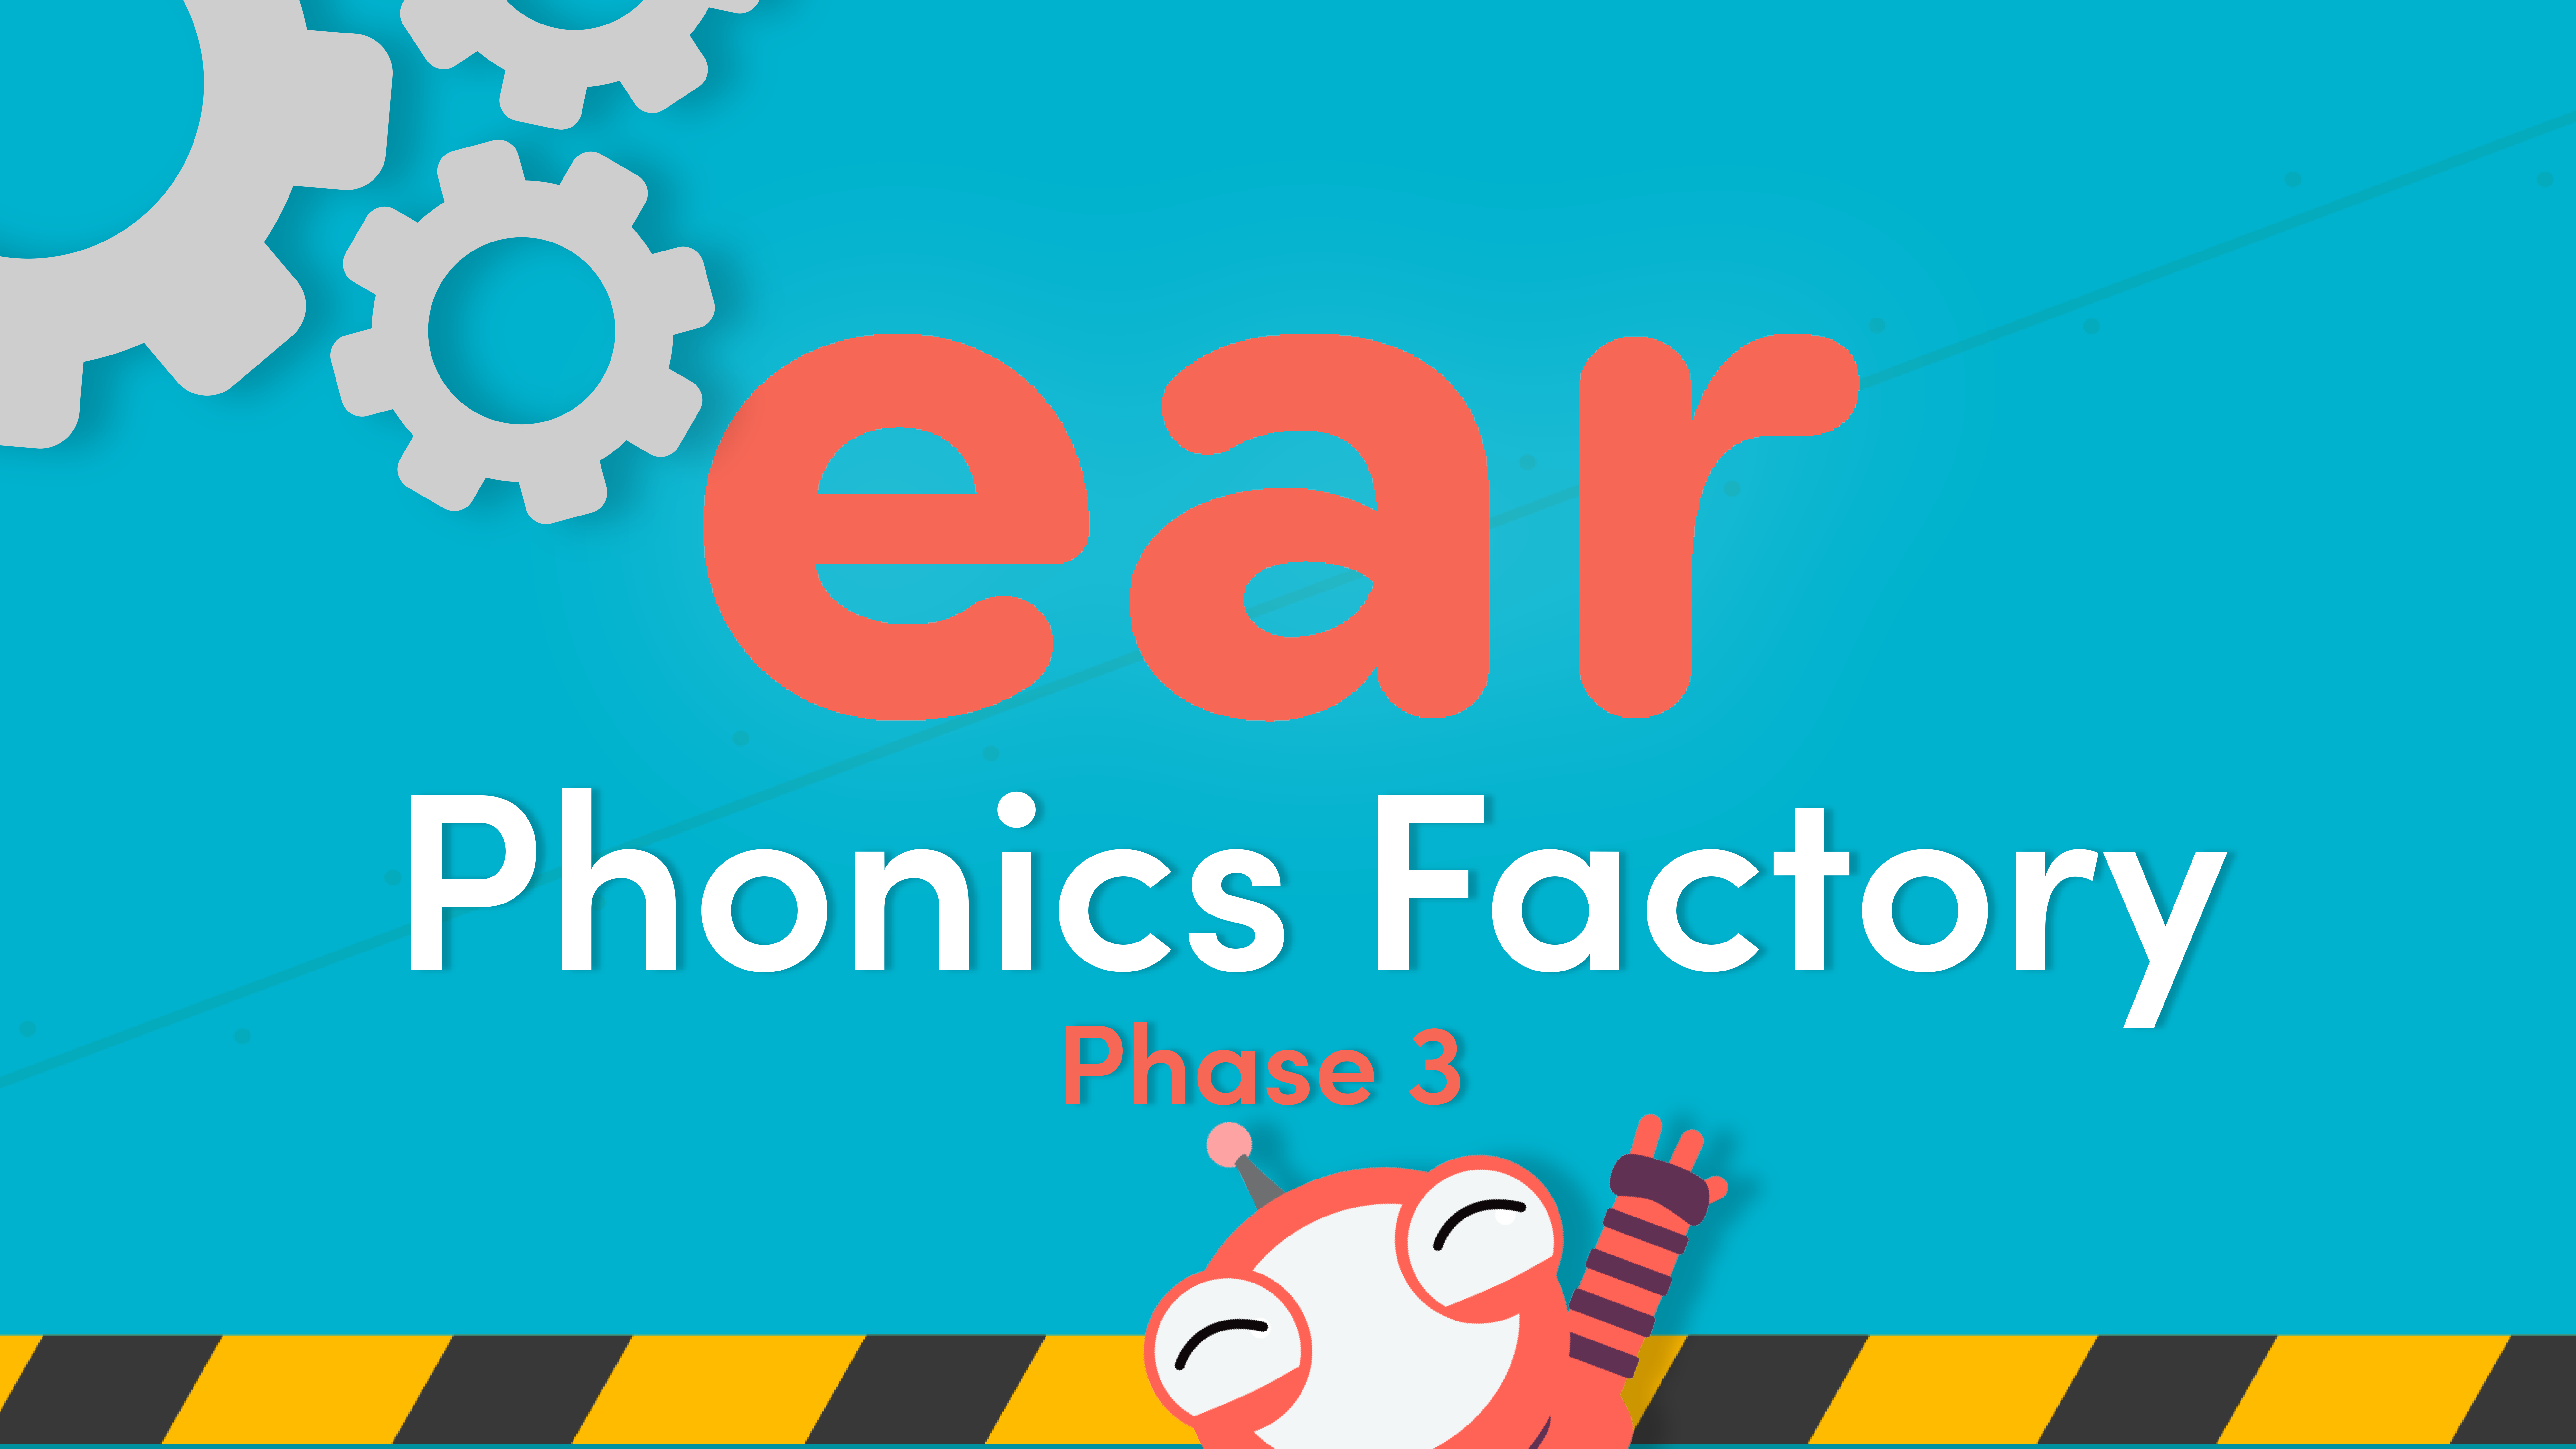 Phonics Phase 3 ear Sound Video in the Phonics Factory